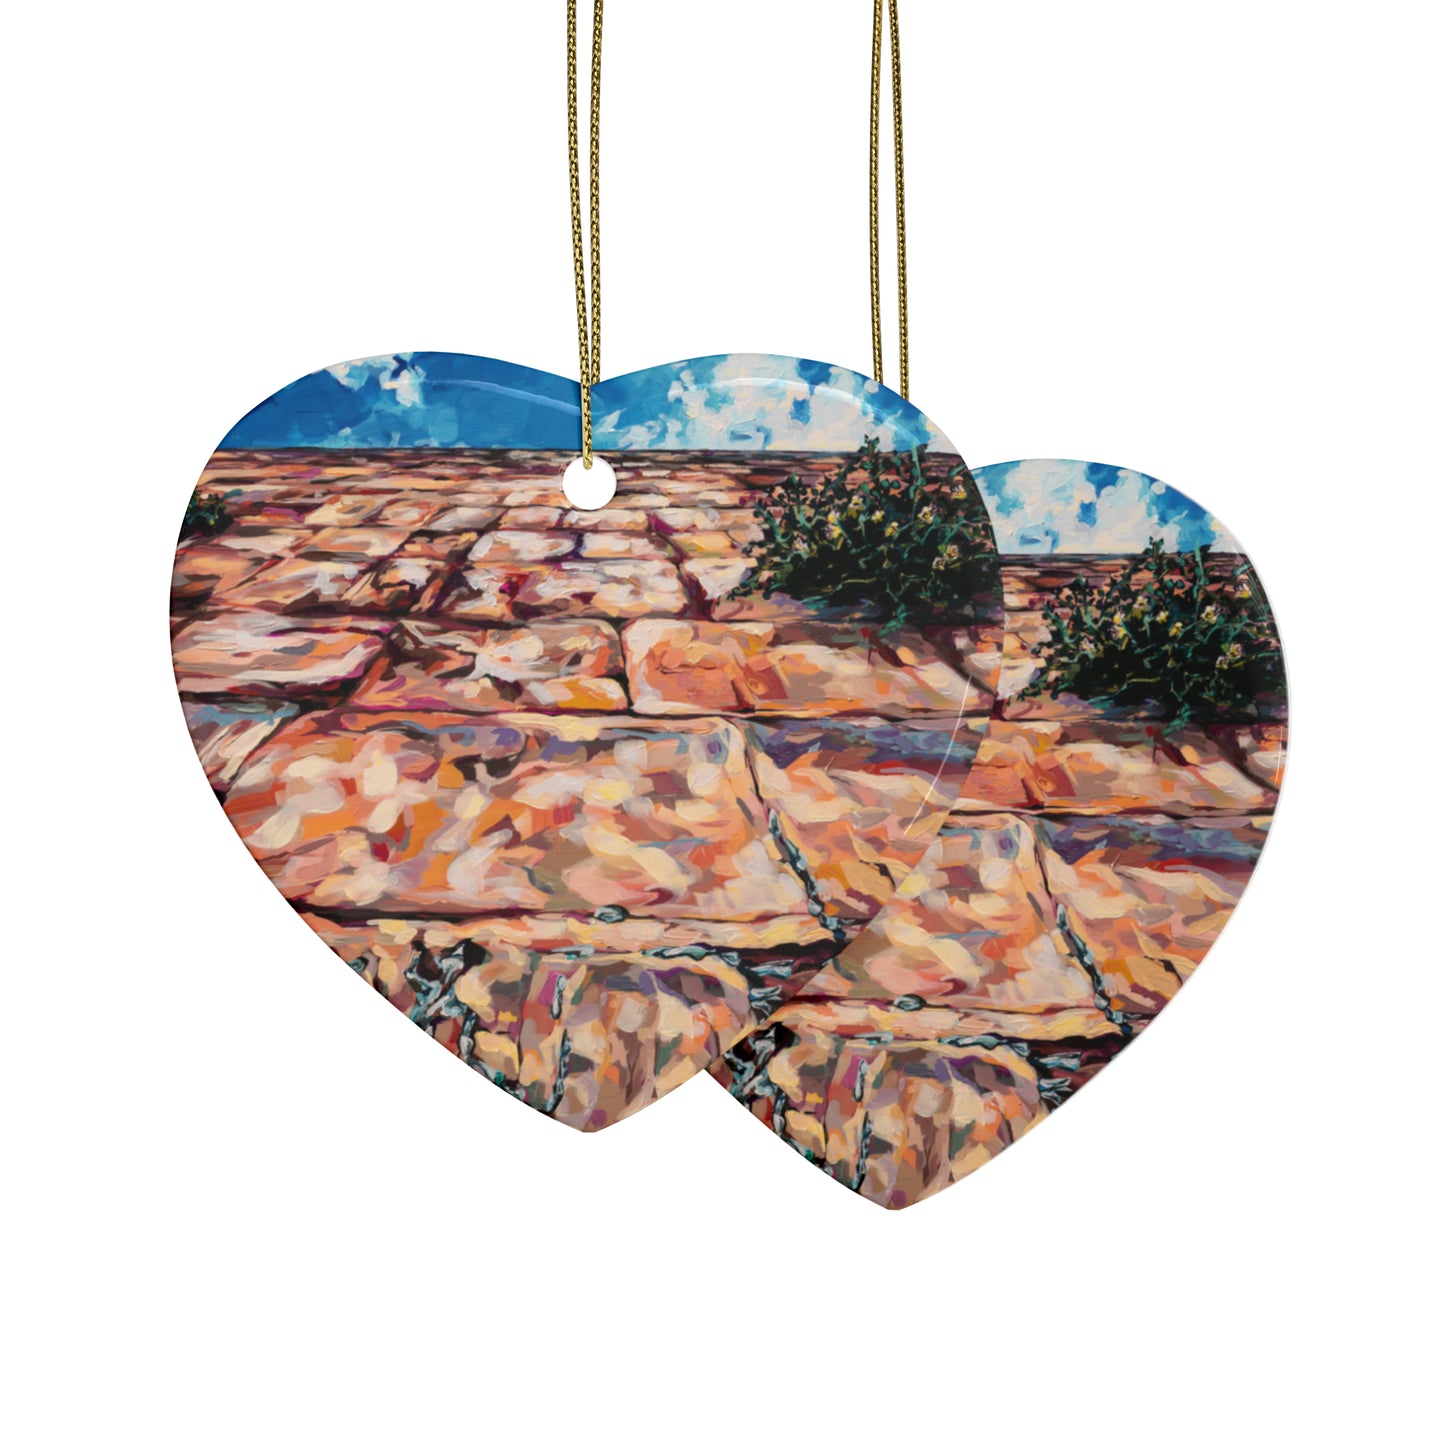 Kotel from Below Heart Shaped Ceramic Car Accessory by Leah Luria